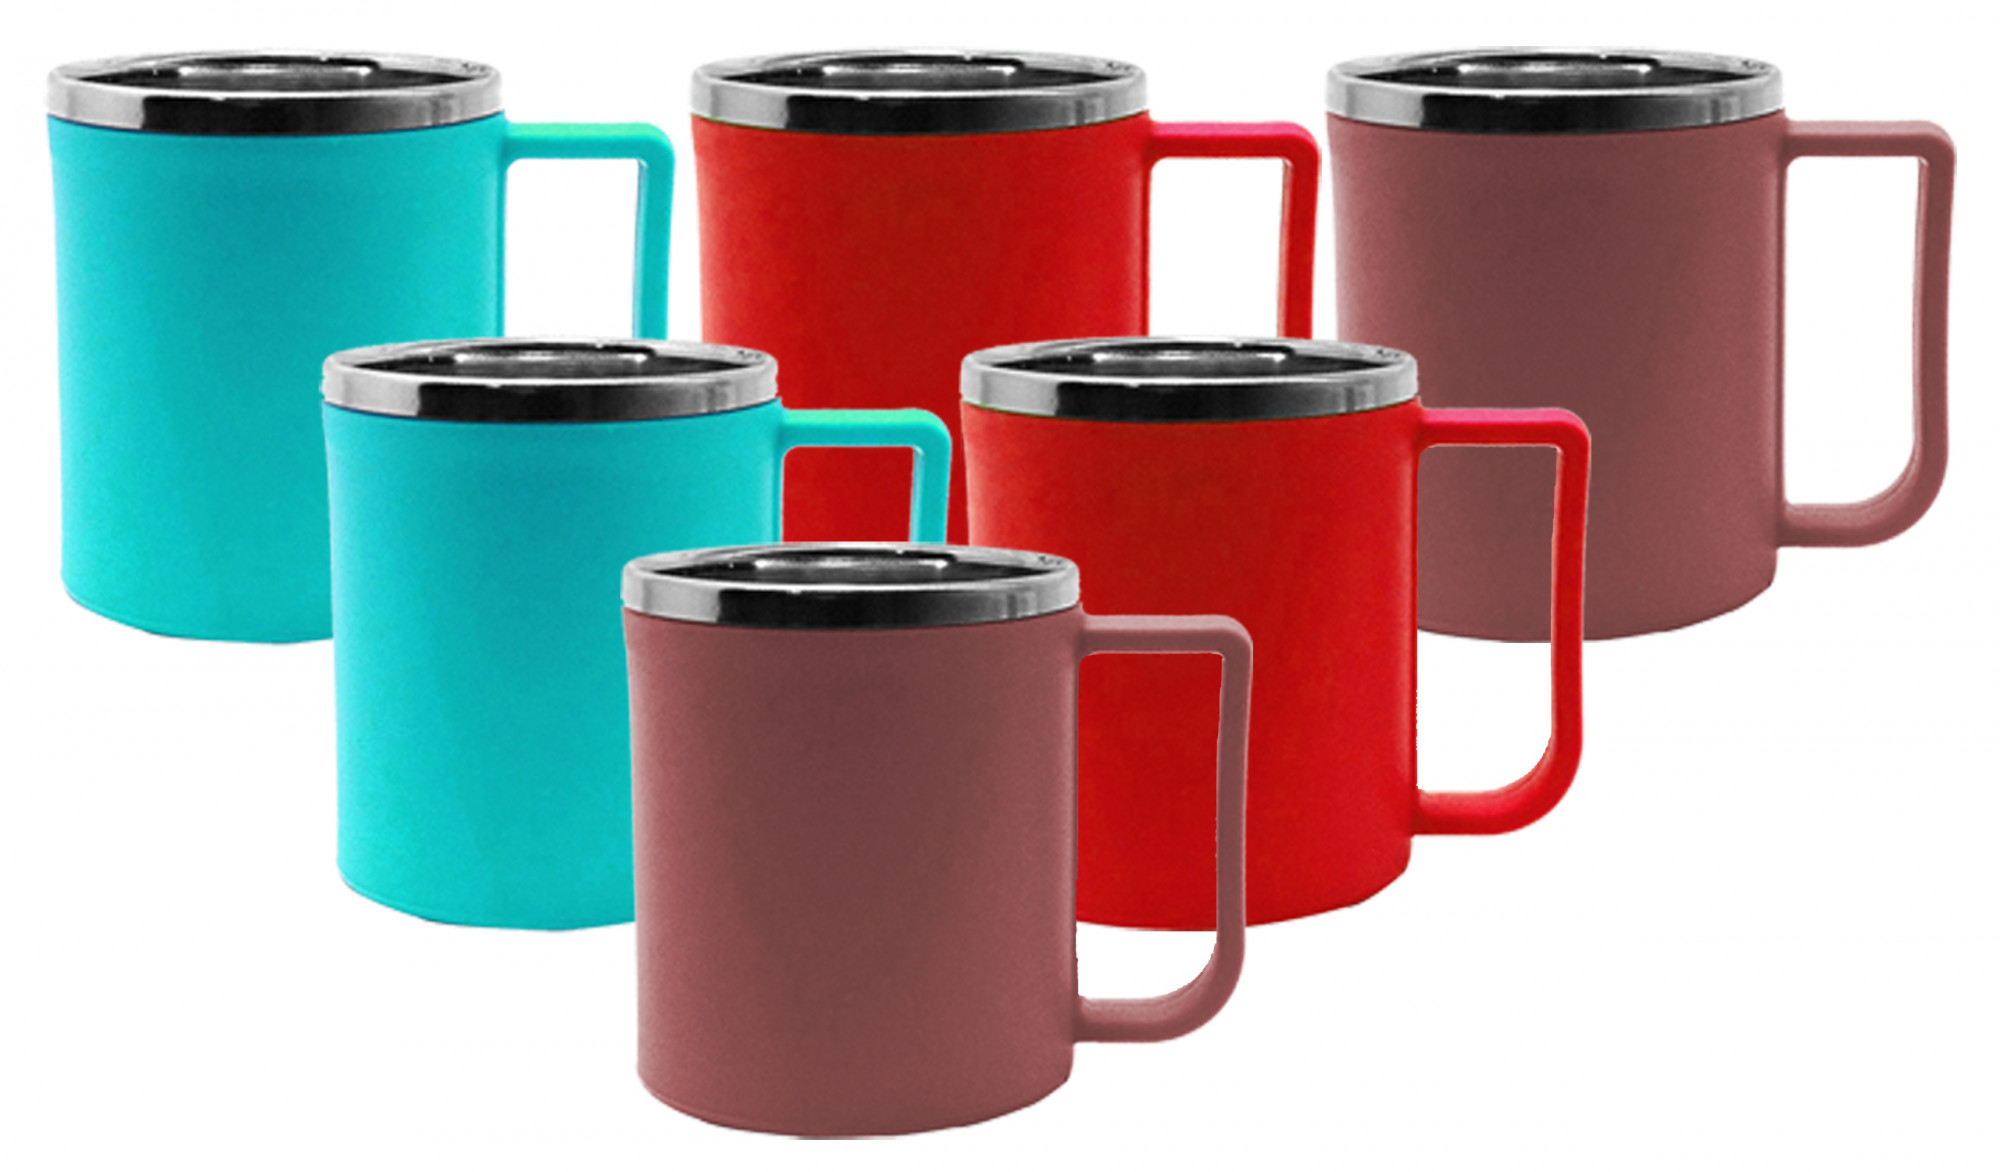 Kuber Industries Plastic Steel Cups for Coffee Tea Cocoa, Camping Mugs with Handle, Portable & Easy Clean,(Green & Red & Brown)